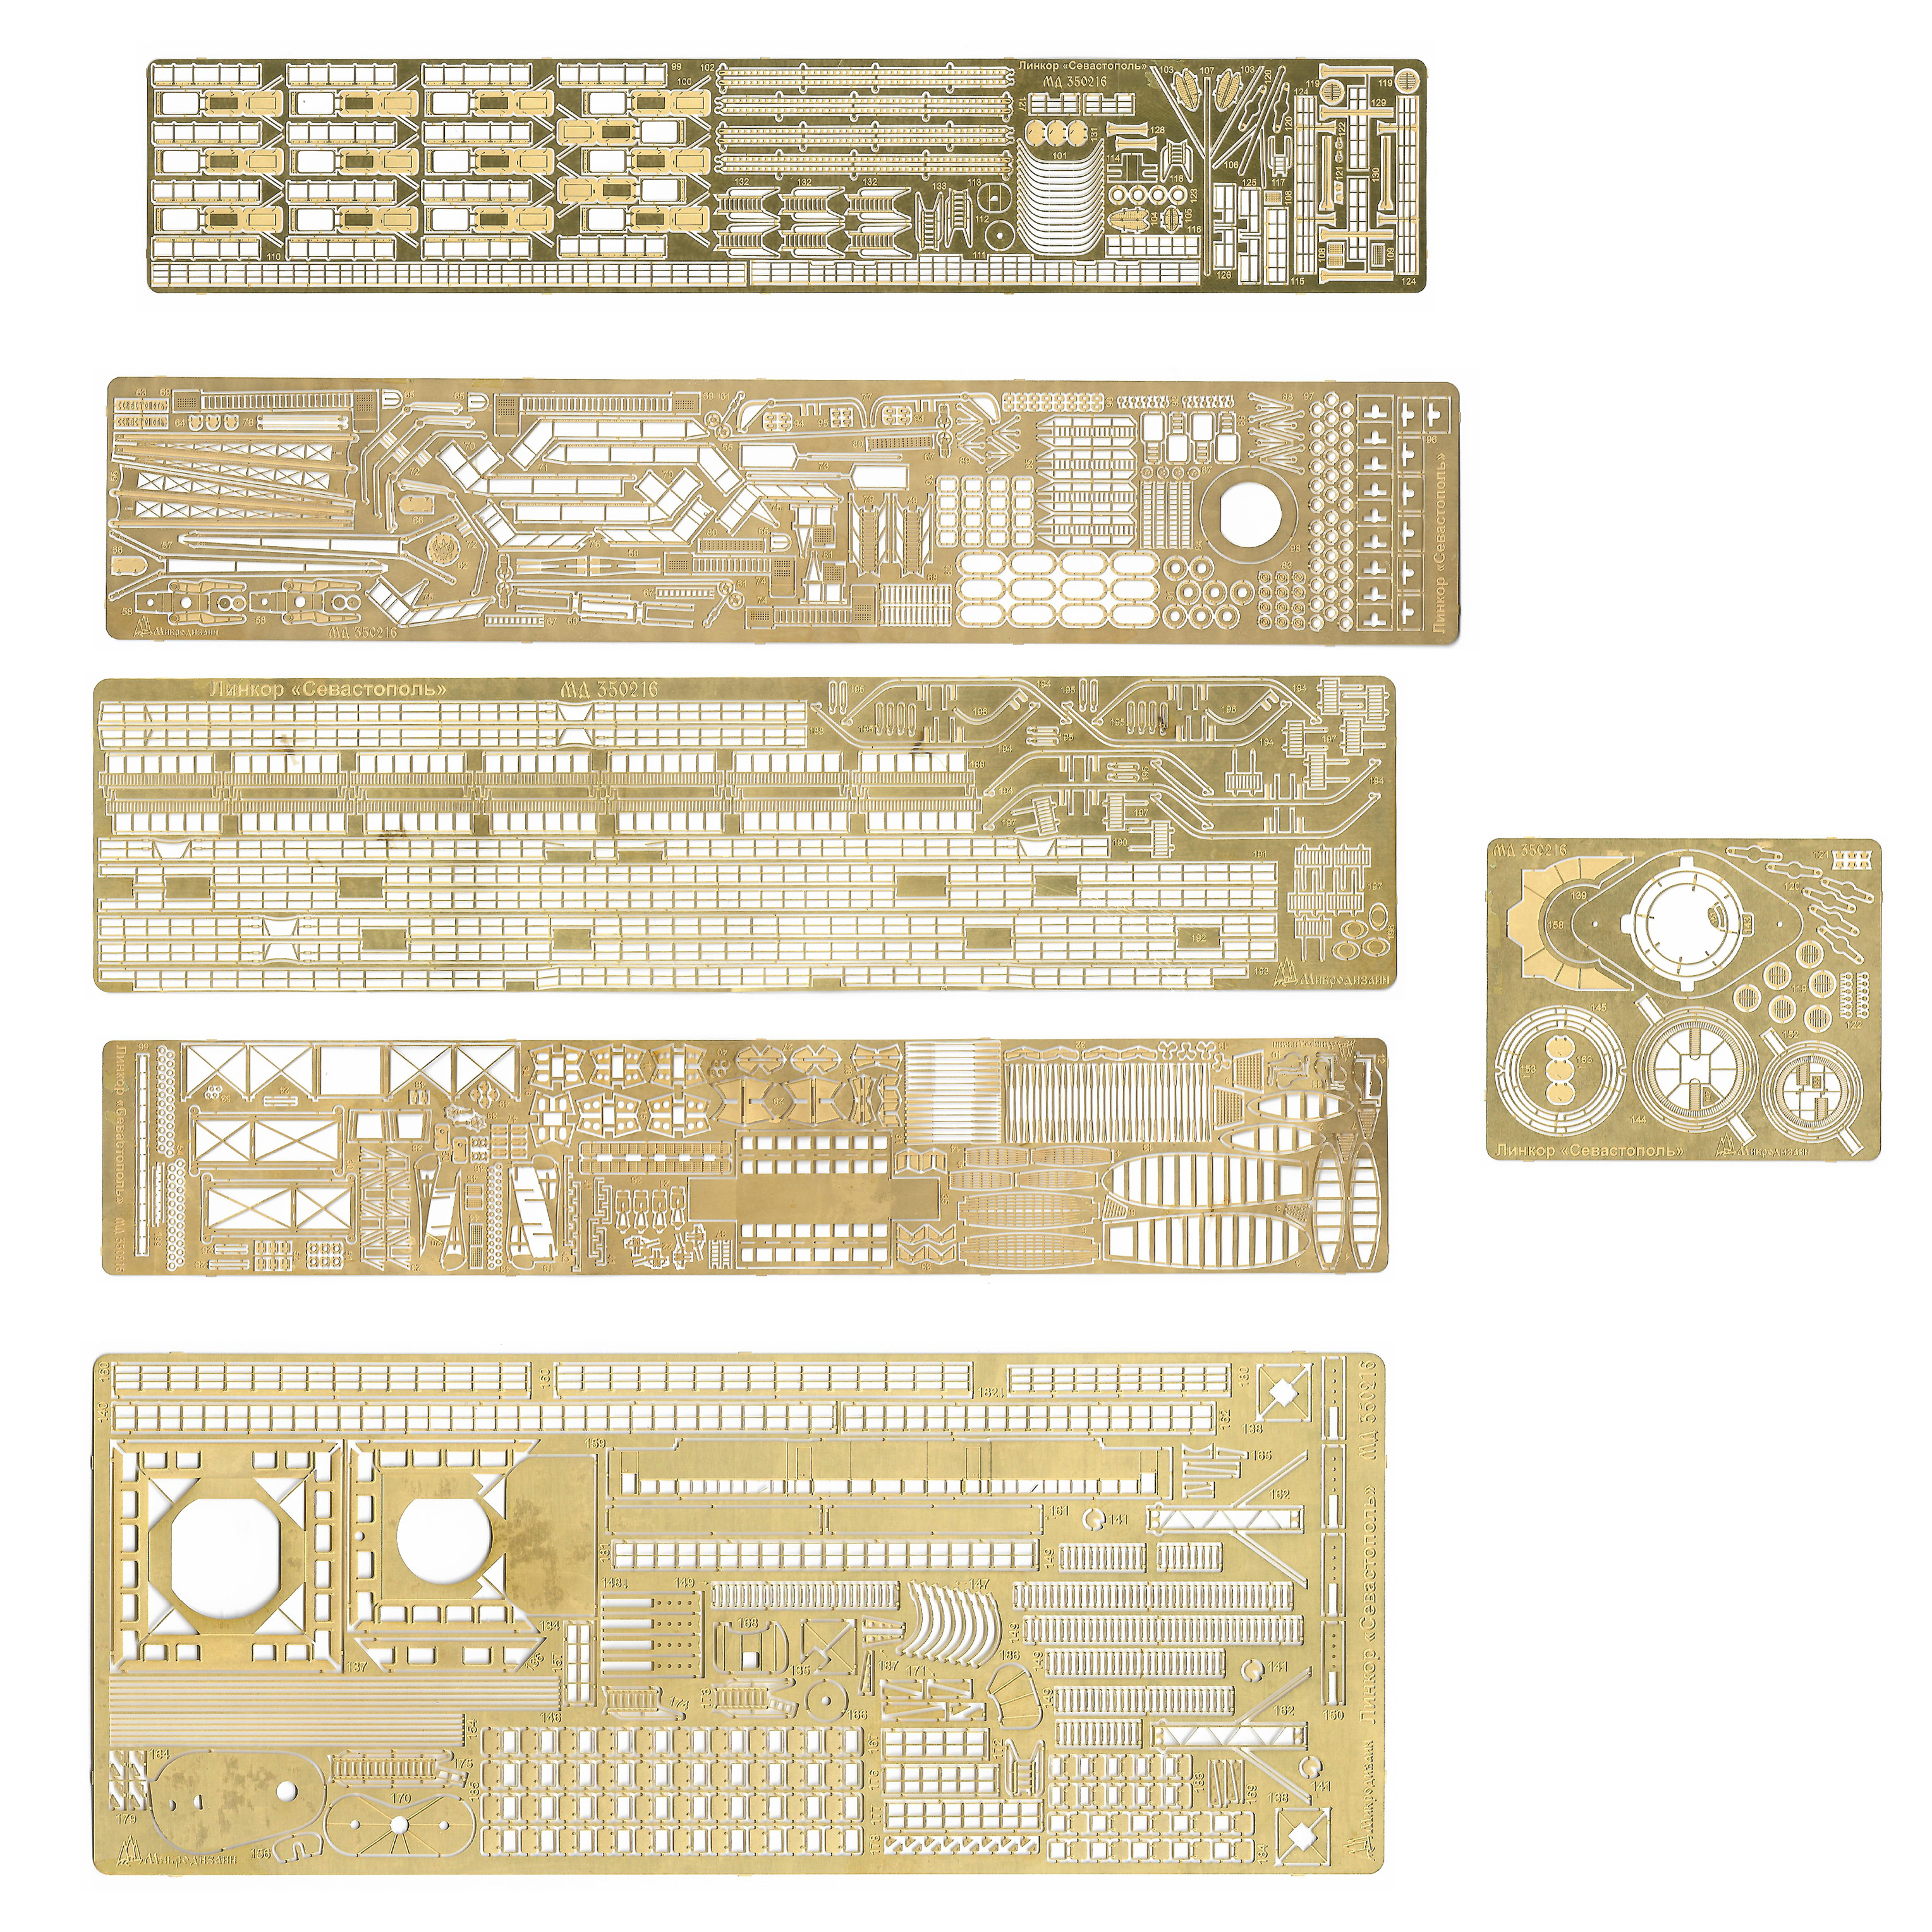 350216 Microdesign 1/350 photo etched parts for the Battleship 